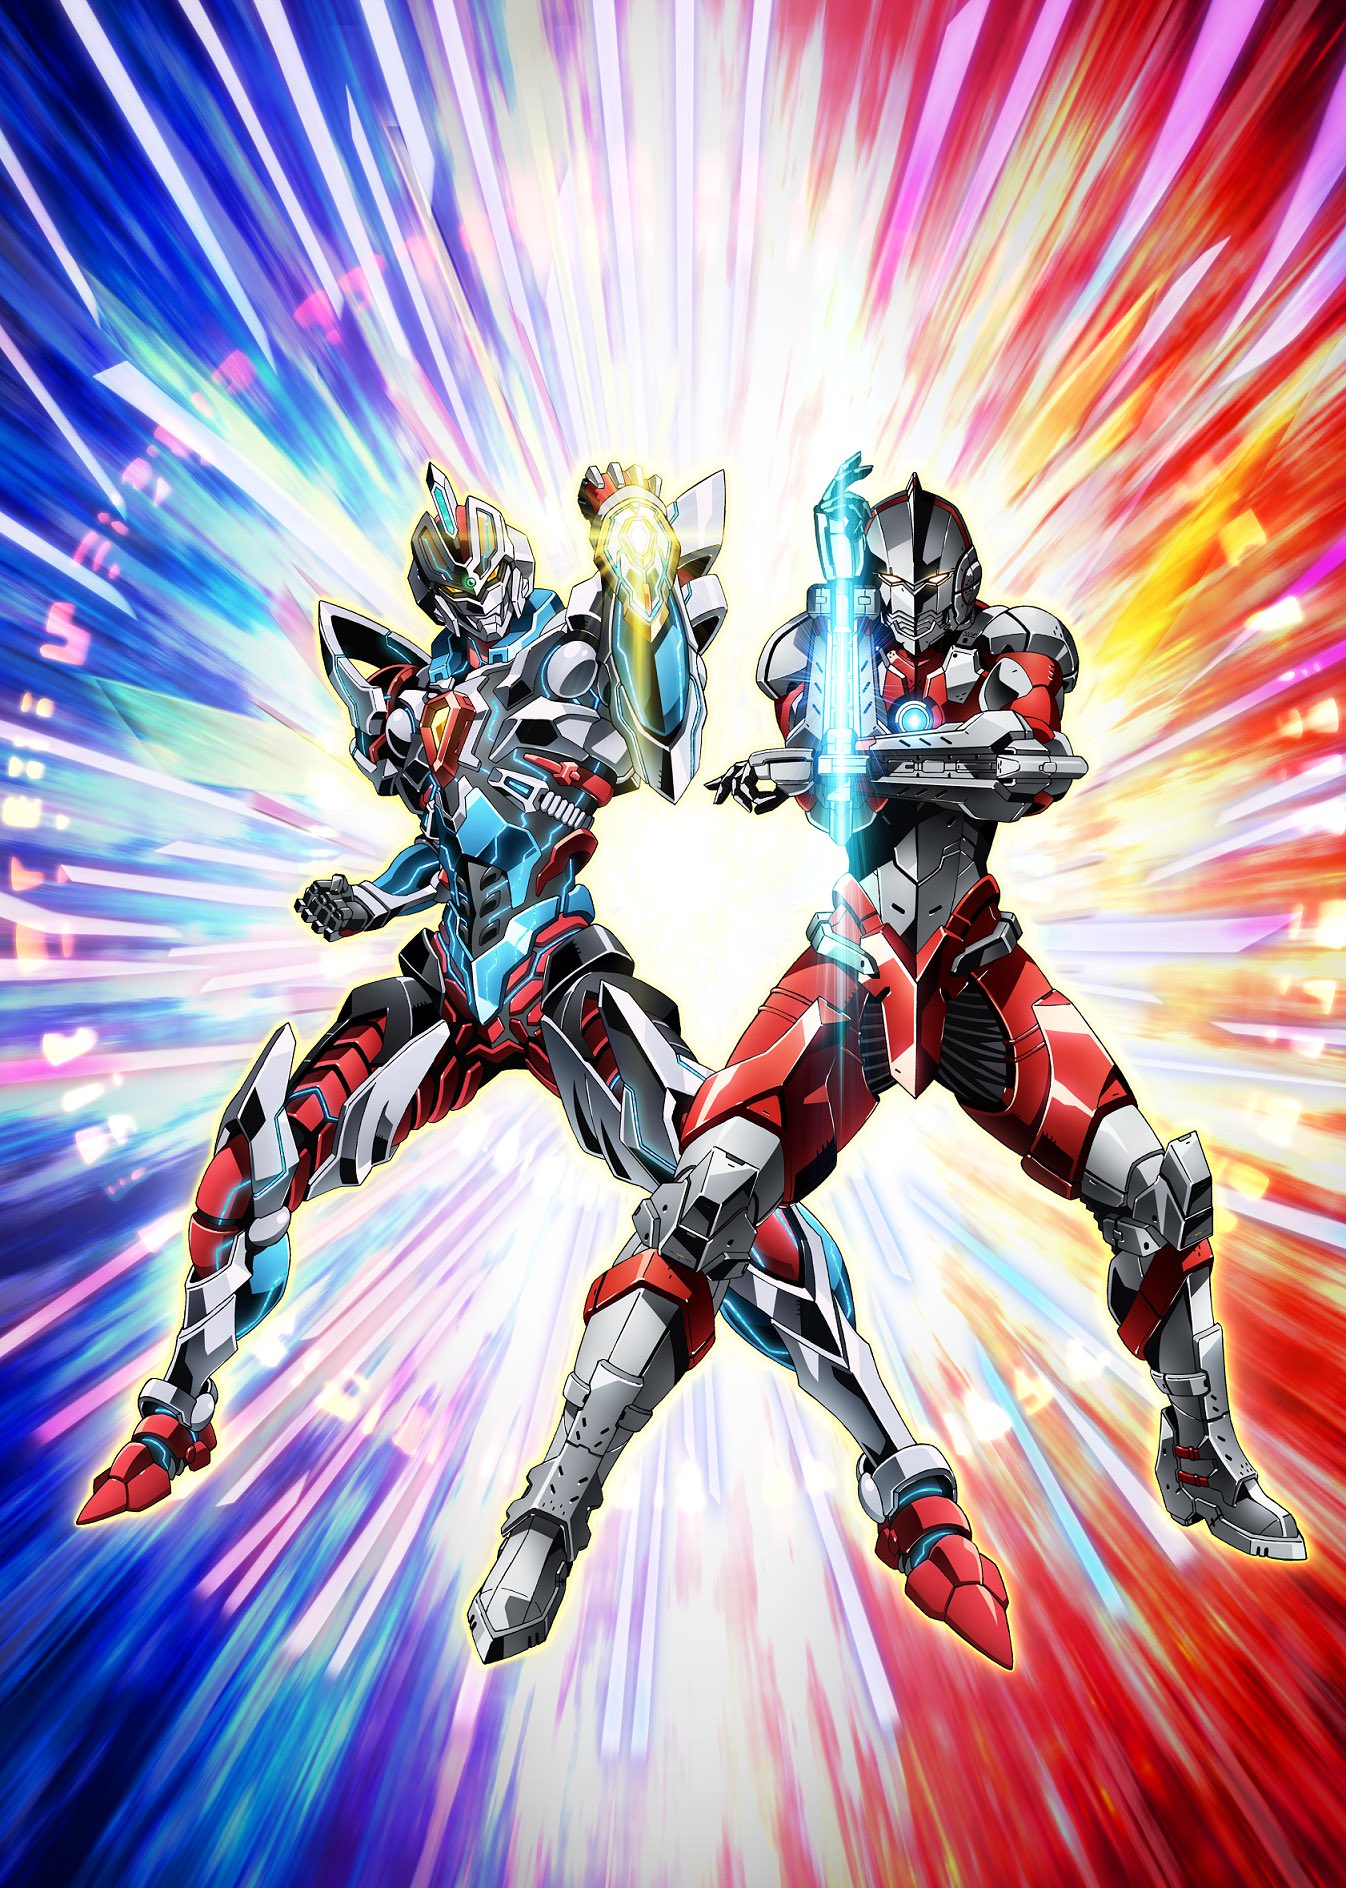 2boys armor clenched_hand commentary_request company_connection crossover glowing glowing_eyes gridman_(ssss) highres multiple_boys official_art orb pose shoulder_armor ssss.gridman ultra_series ultraman ultraman_(hero's_comics) ultraman_suit yellow_eyes